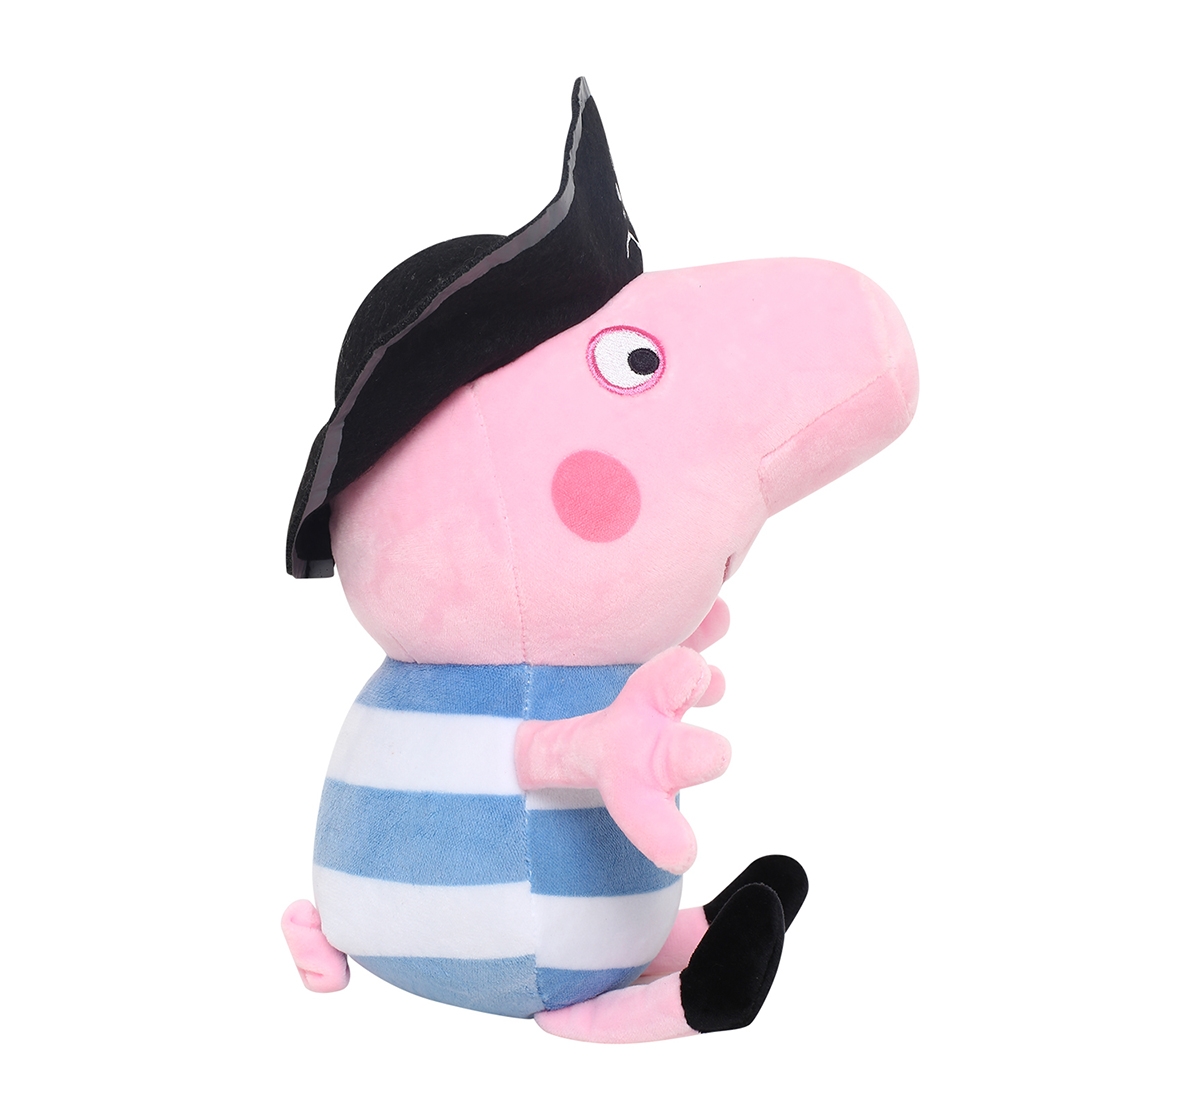 Peppa Pig | Peppa Pig In Pirate Costume Multi Color 30 Cm Soft Toy for Kids age 3Y+ - 30 Cm 5